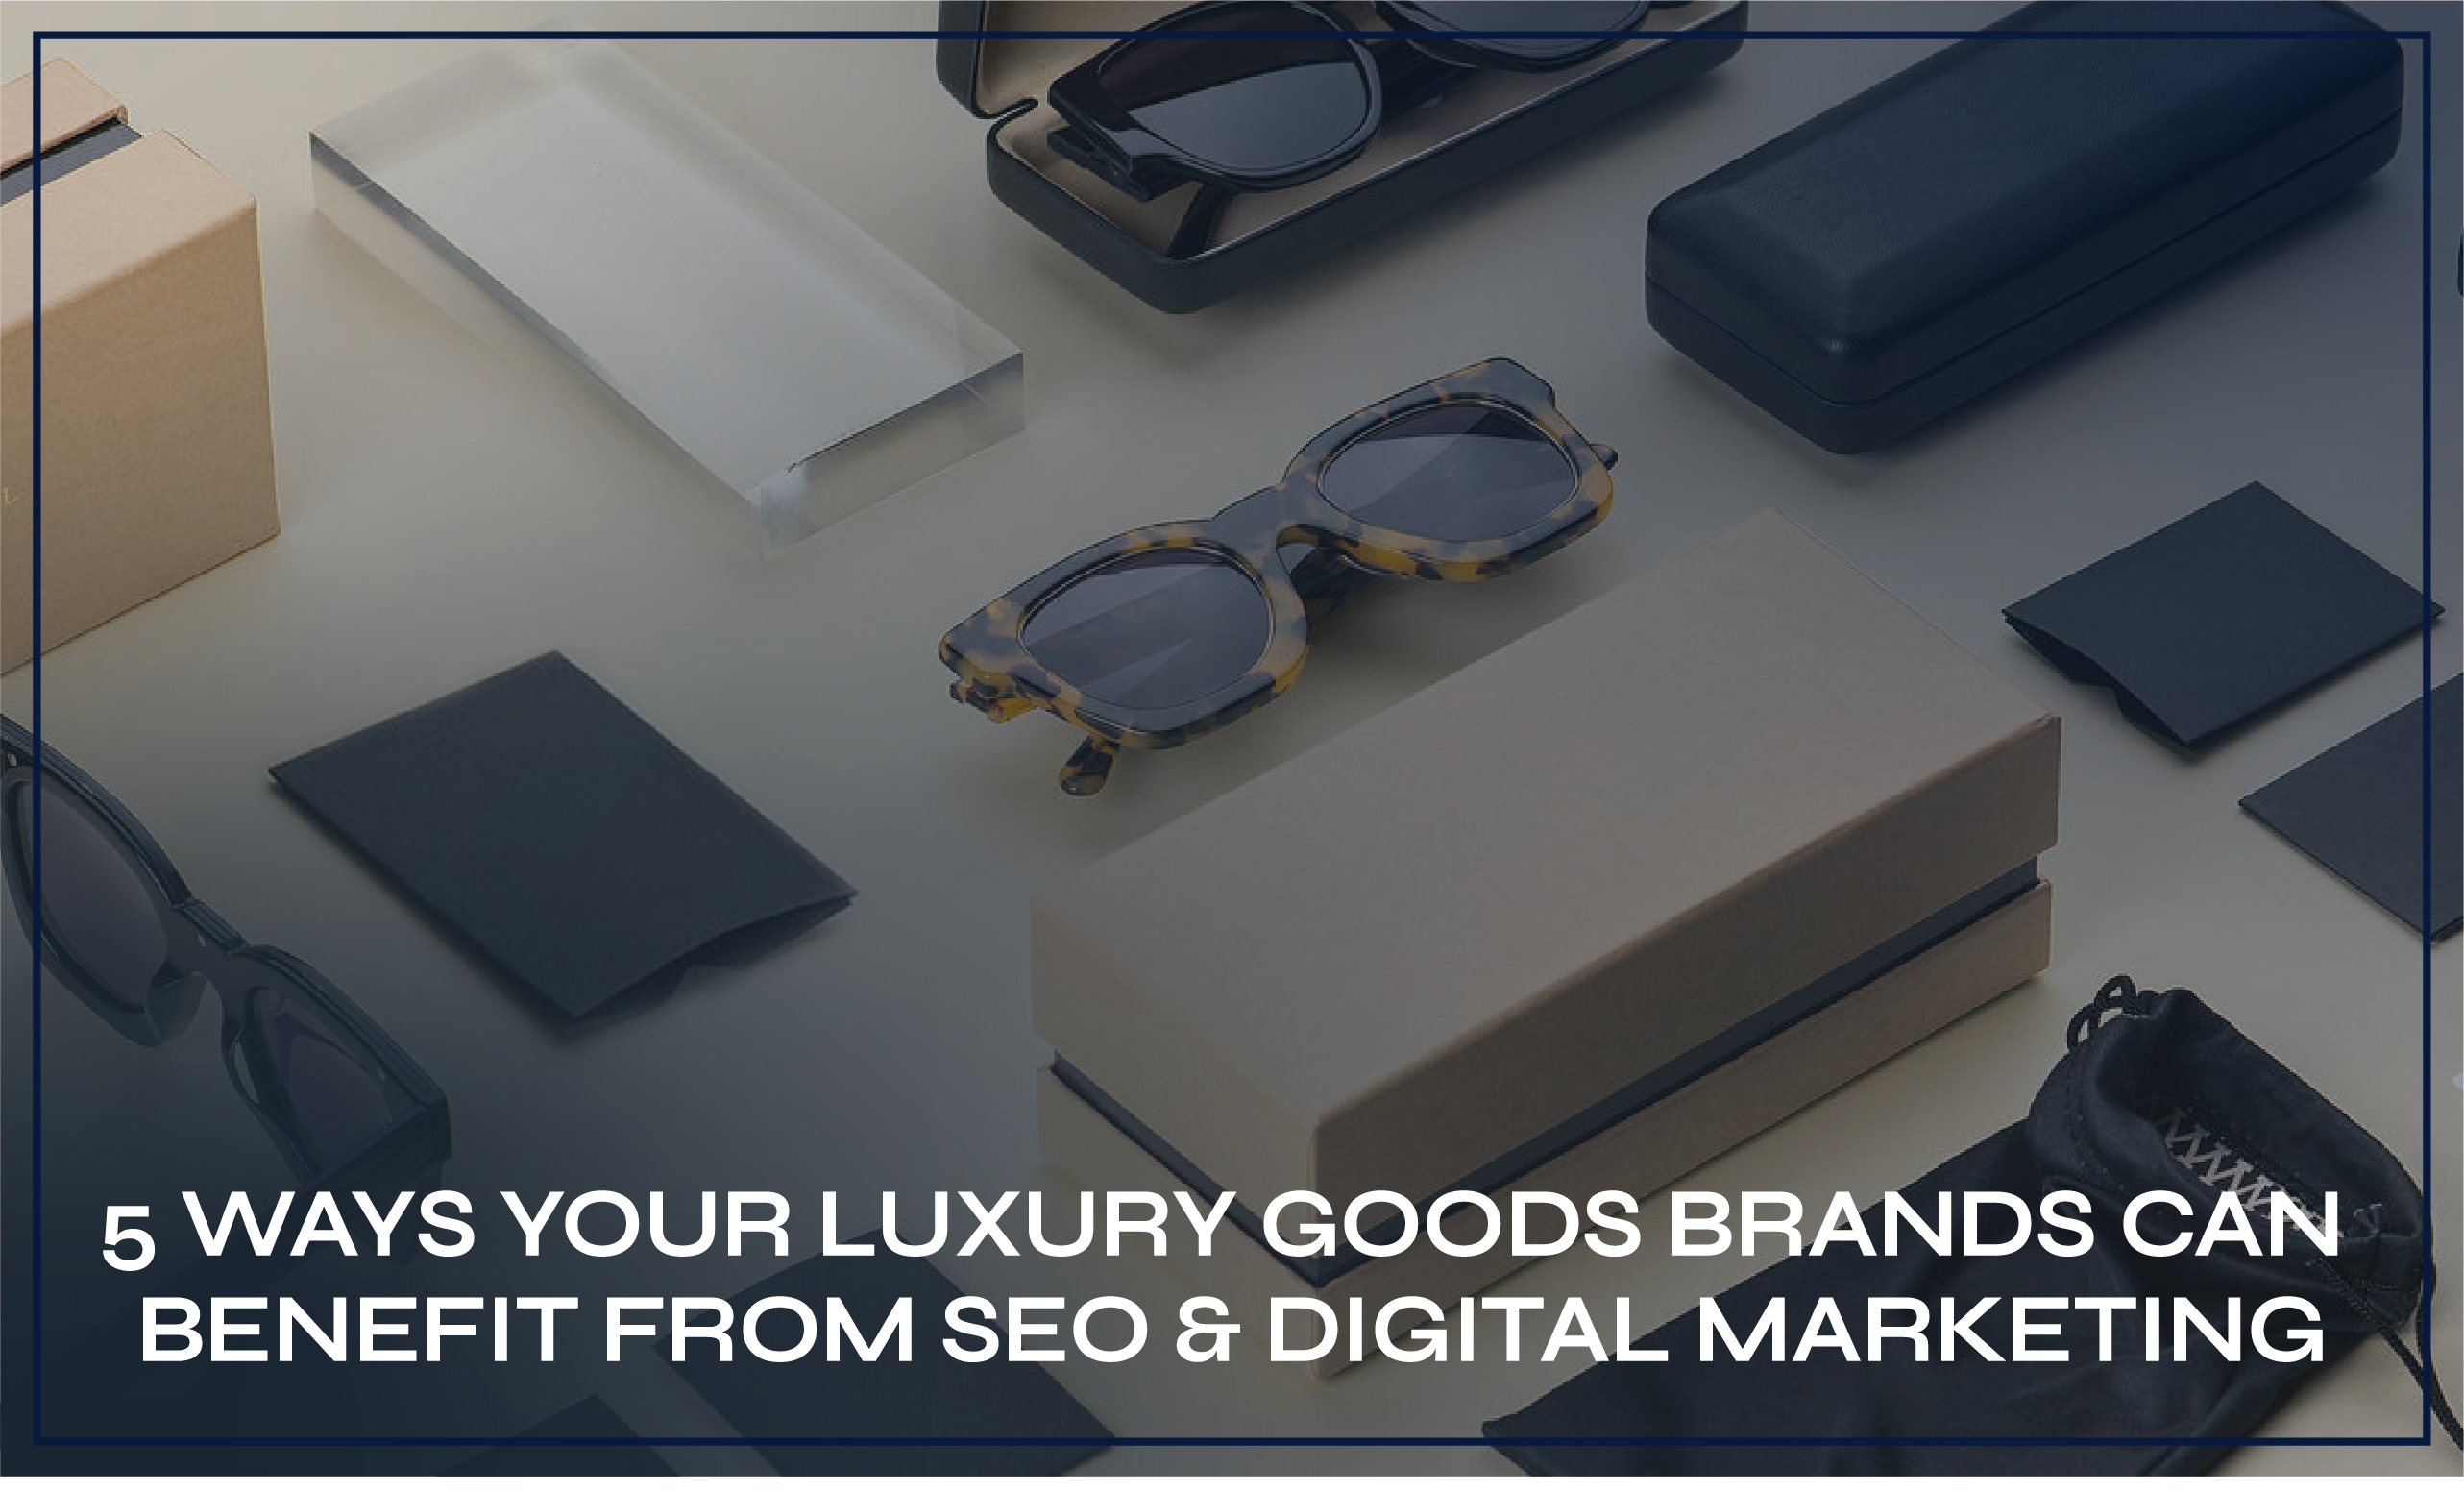 5 Ways Your Luxury Goods Brands Can Benefit From SEO & Digital Marketing